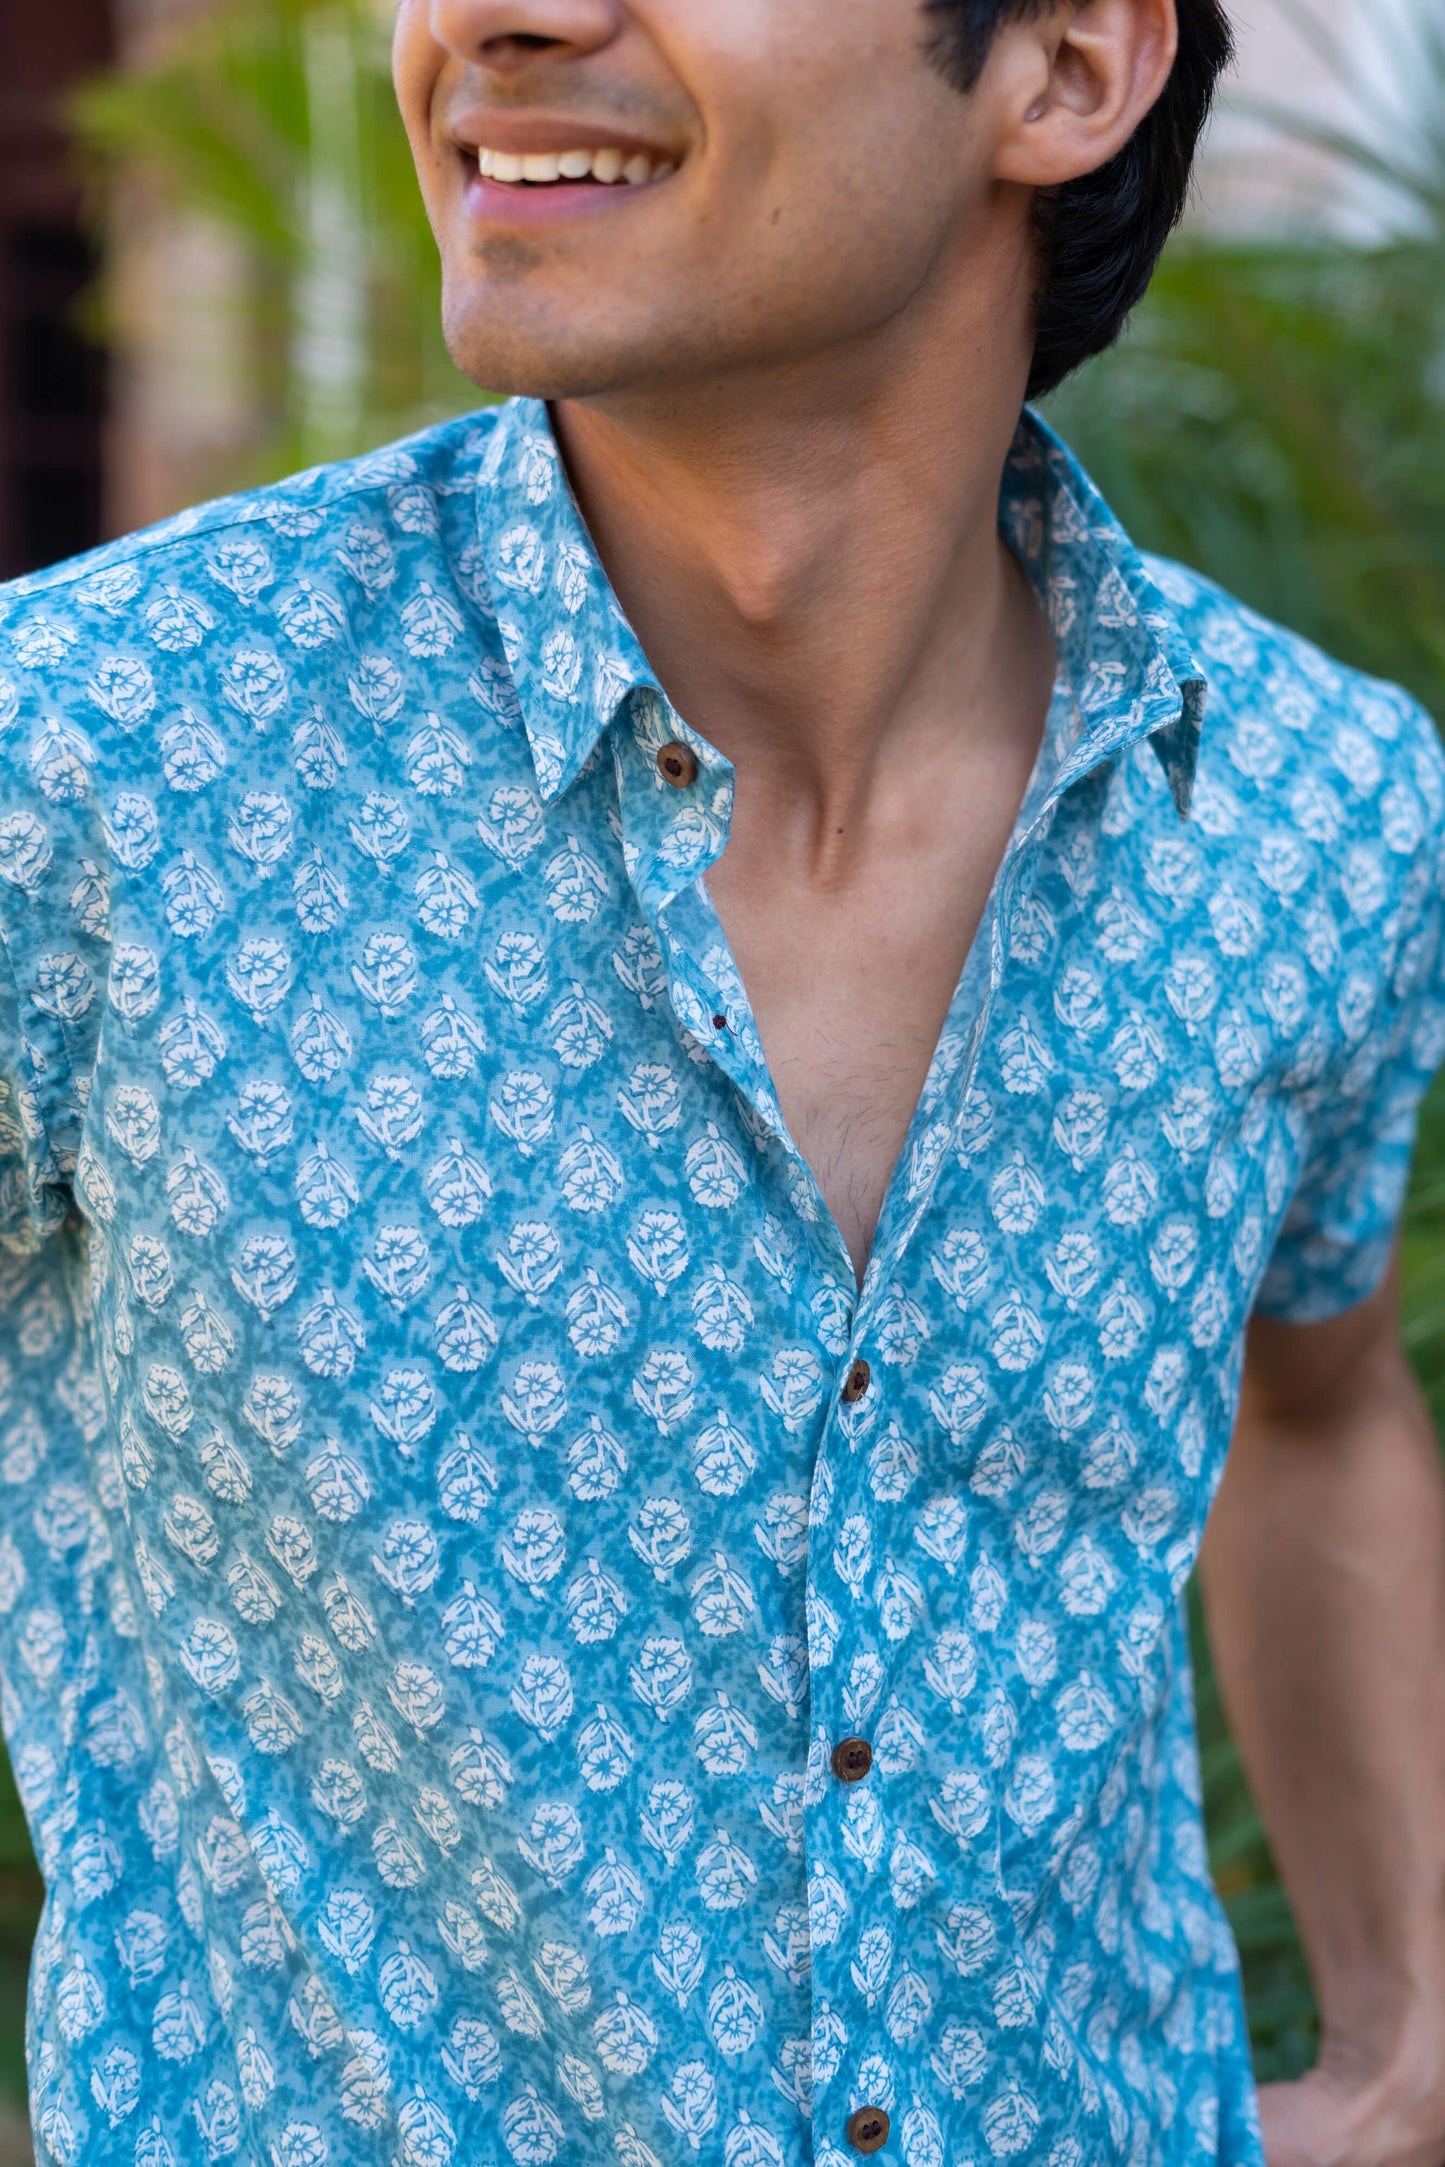 The Sky Blue Half Sleeves Shirt With Floral Butti Print